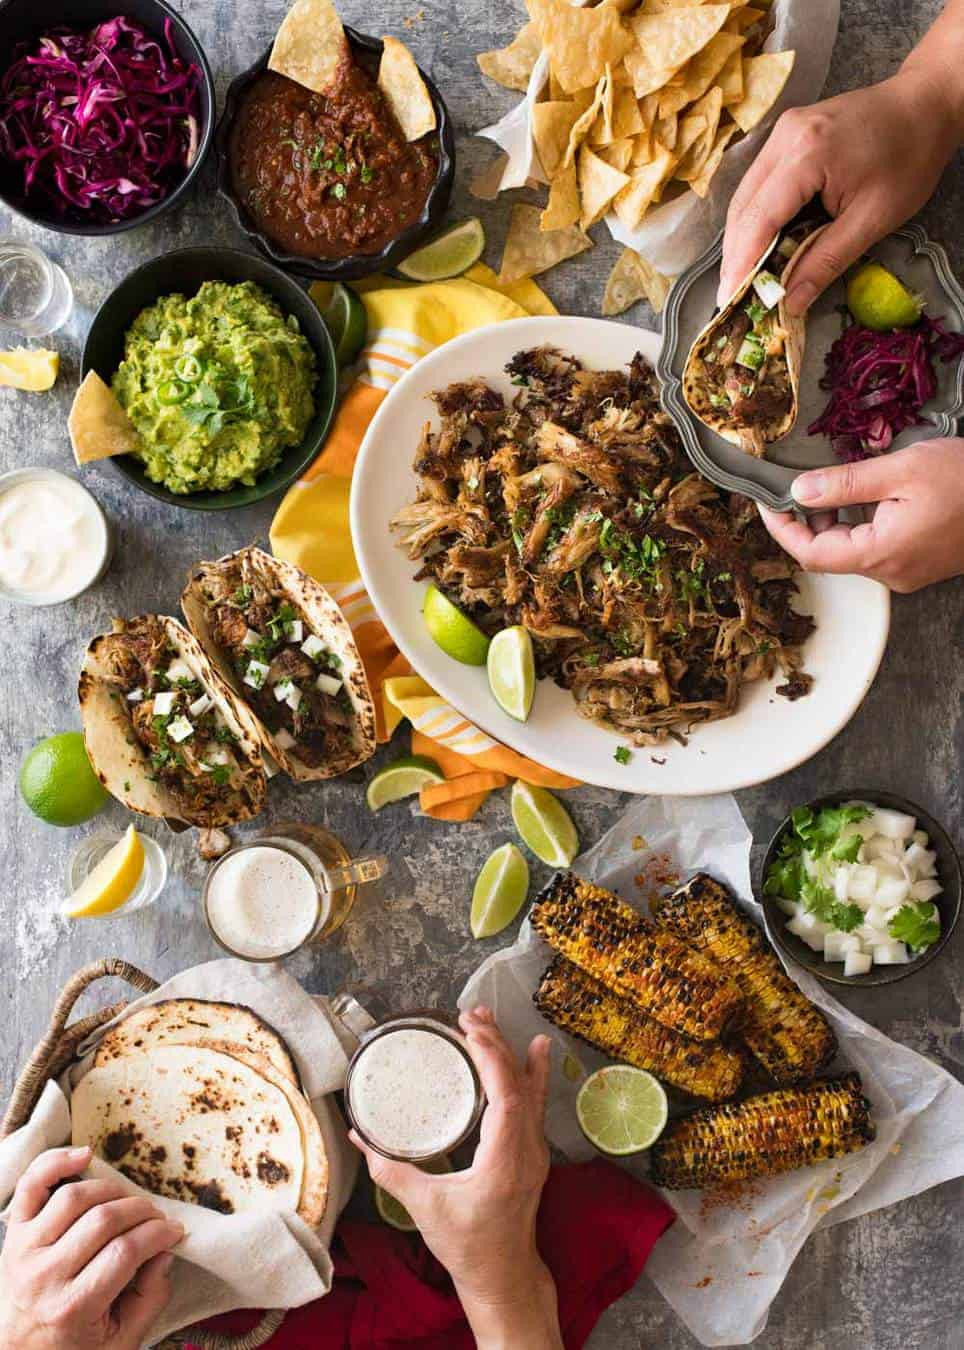 Mexican Dinner Party Ideas
 A Big Mexican Fiesta That s Easy to Make